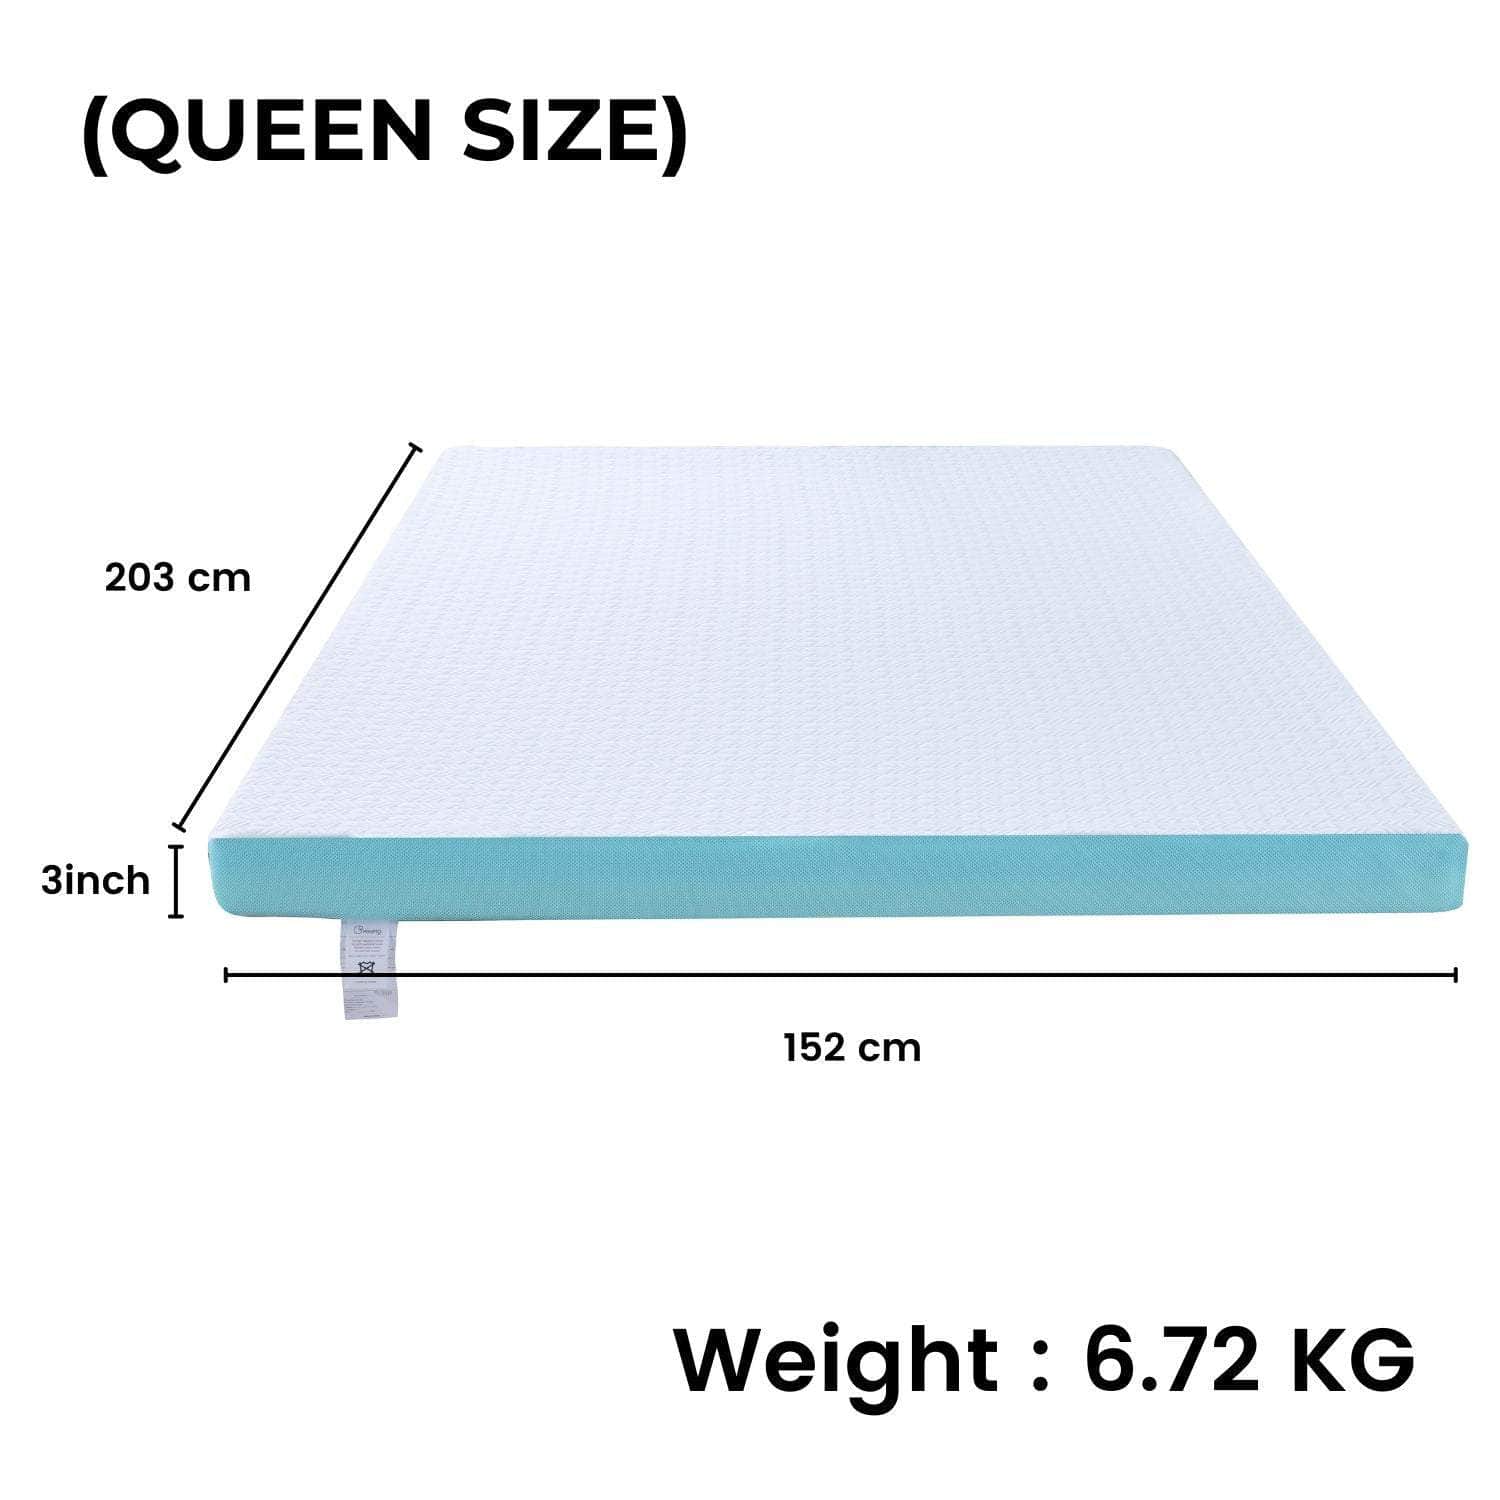 Dual Layer Mattress Topper 3 Inch With Gel Infused (Queen)